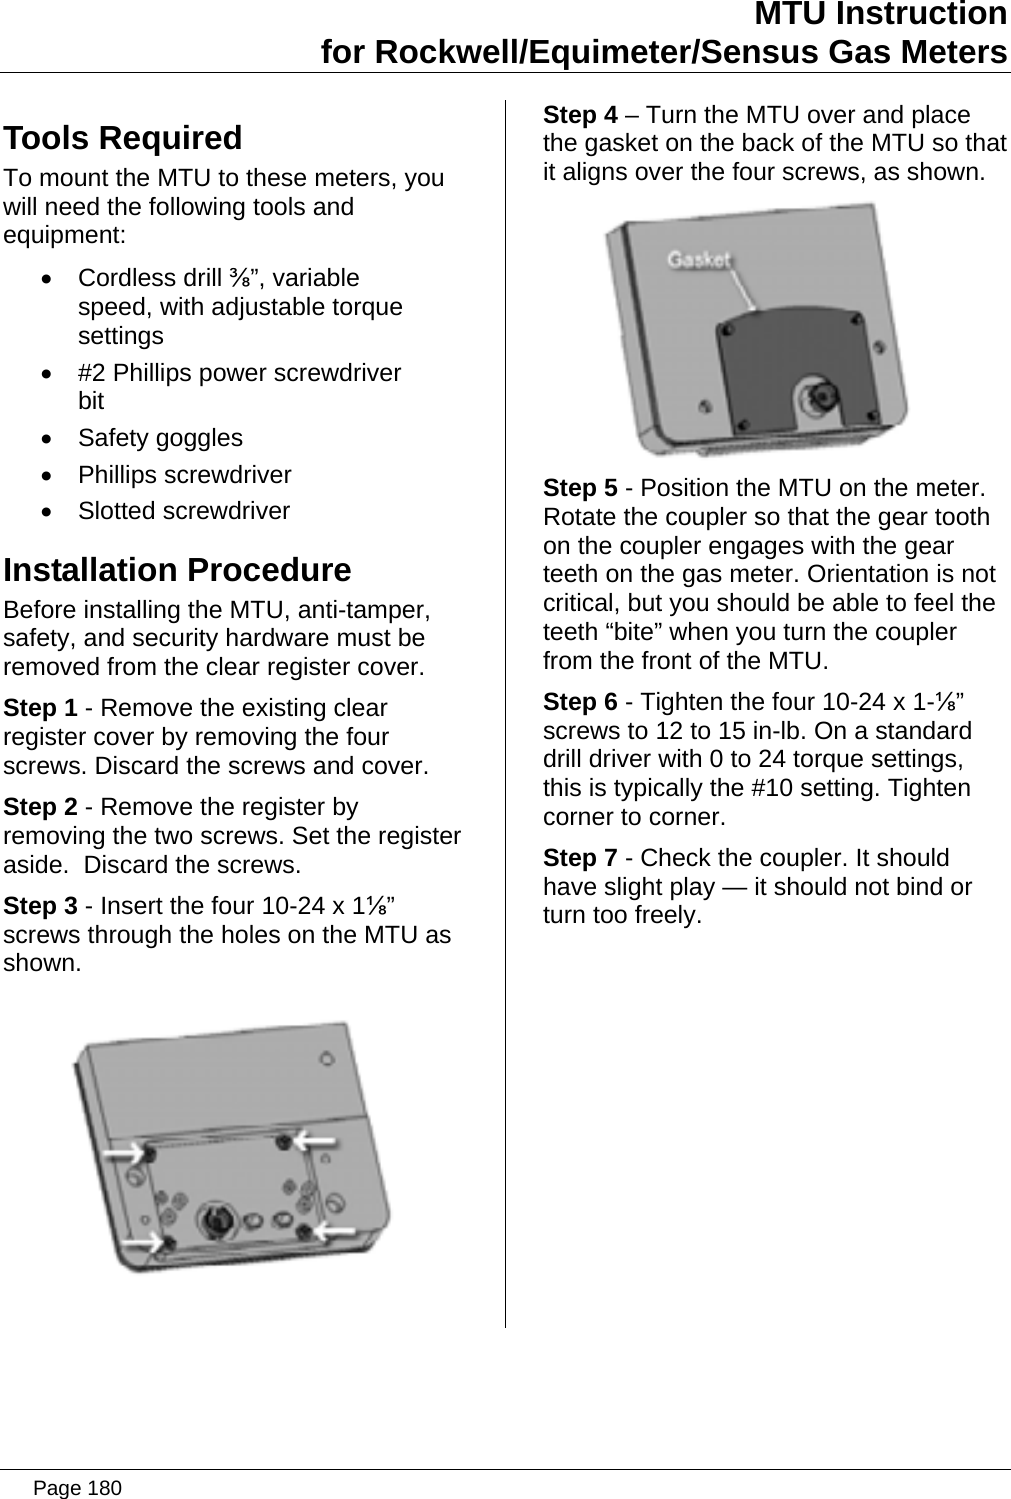 Page 180 of Aclara Technologies 09015 Transmitter for Meter Reading User Manual users manual